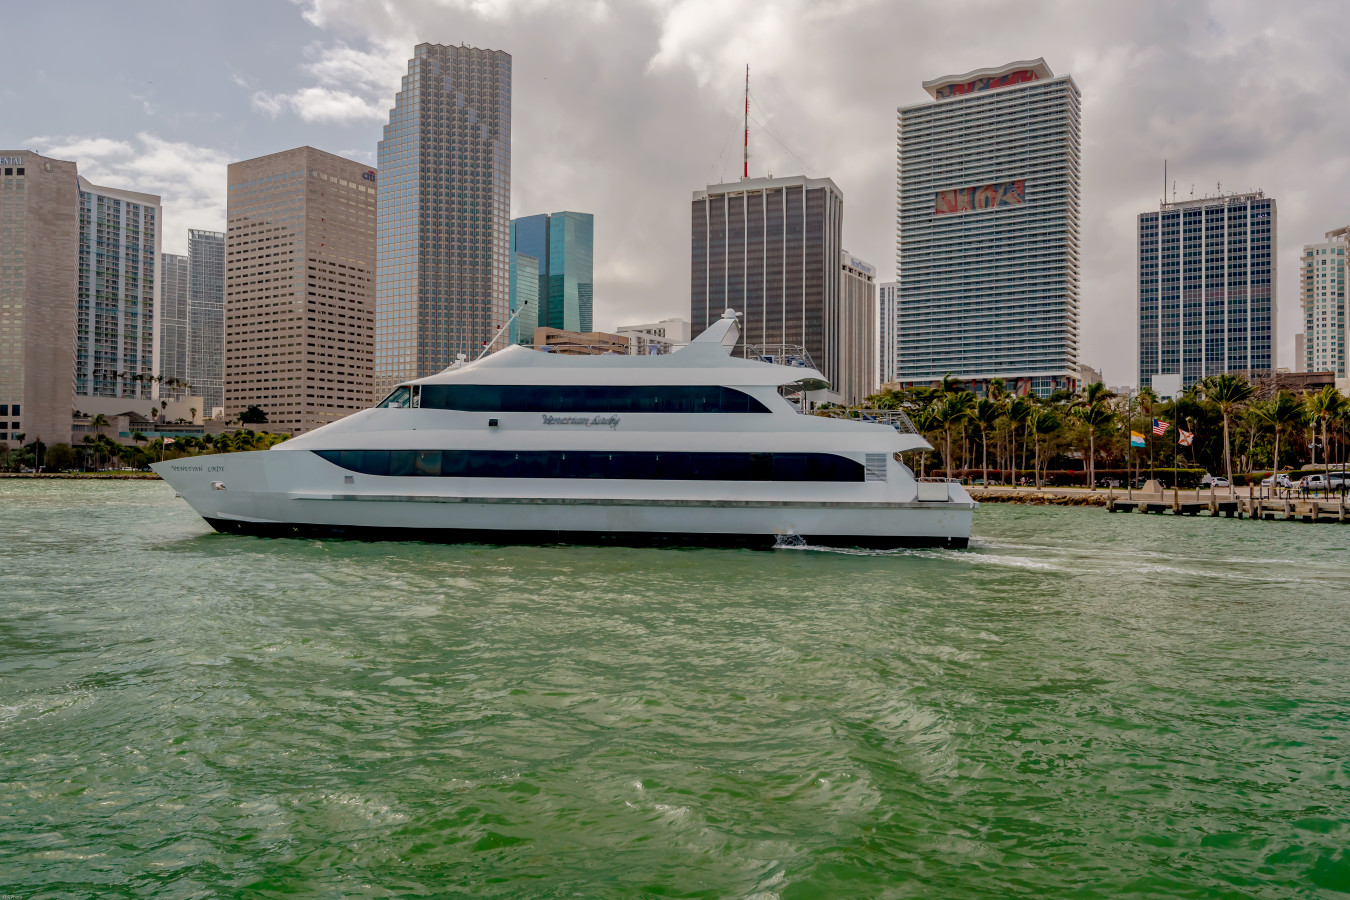 biscayne lady yacht charters reviews